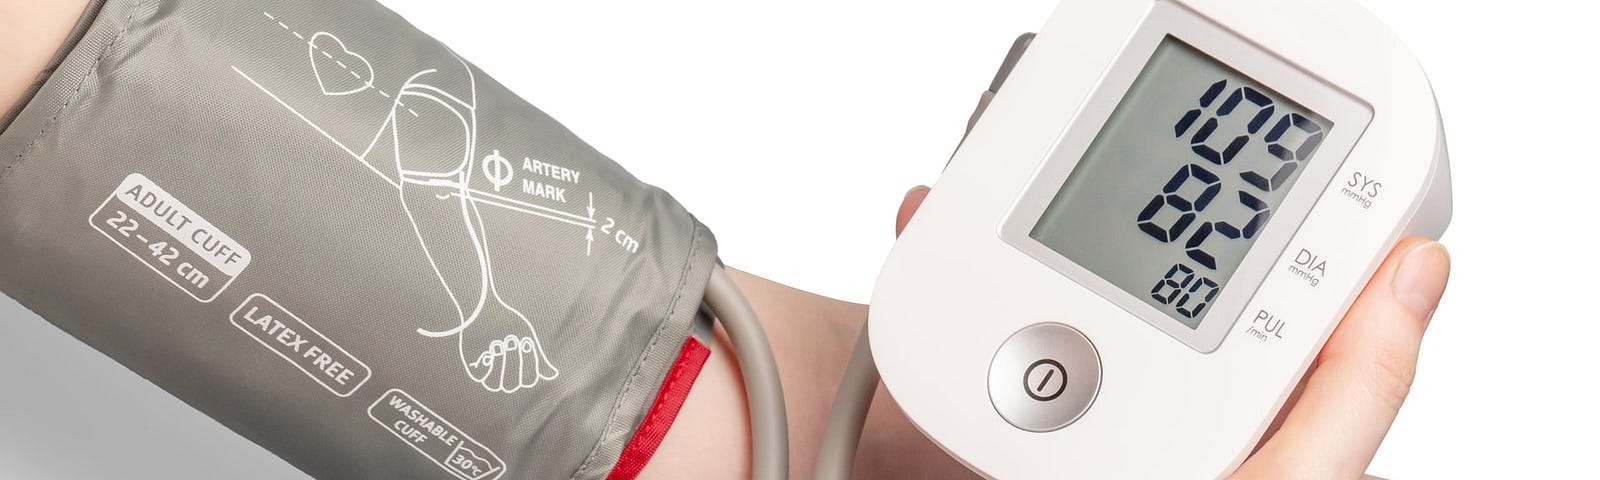 An arm with a blood pressure monitor